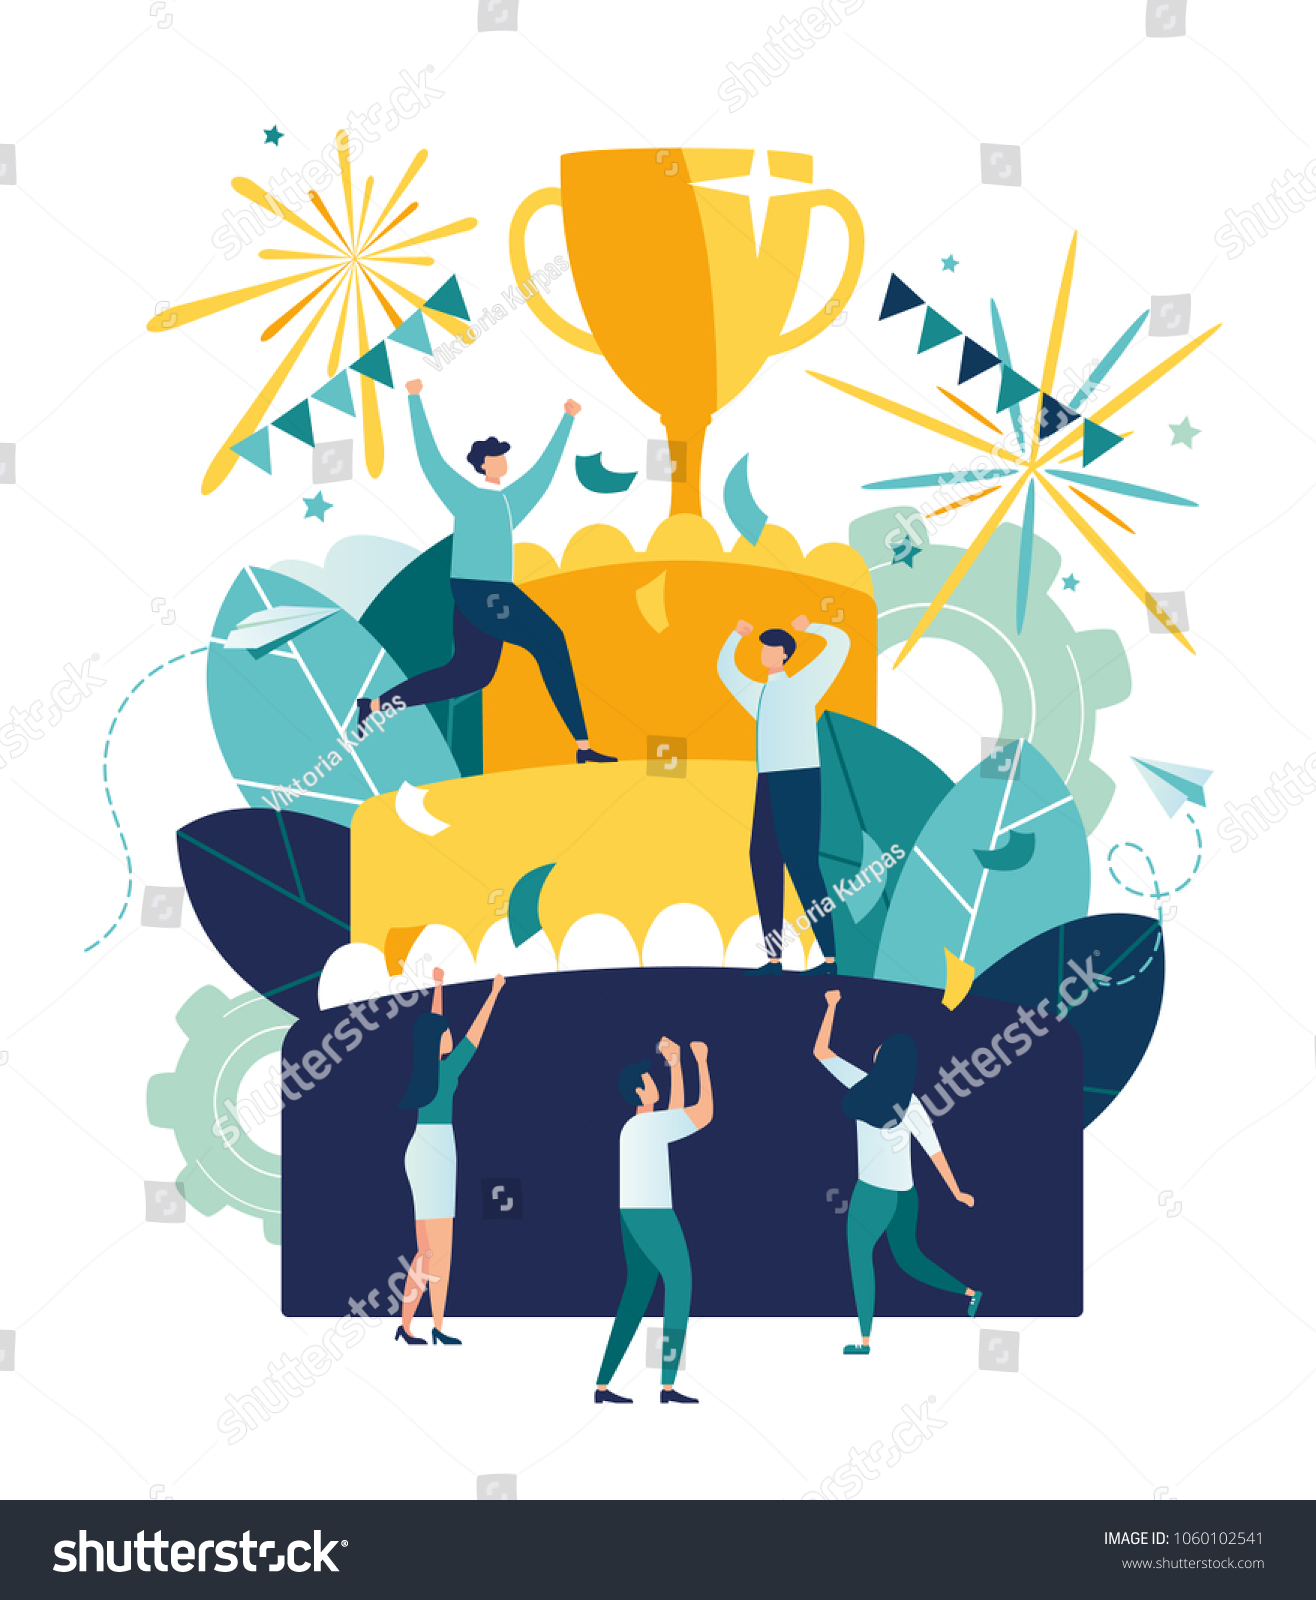 SVG of Vector business illustration, leadership qualities in a creative team, direction to a successful path, little people standing on a large cake are happy for the winner, a successful career path, vector svg